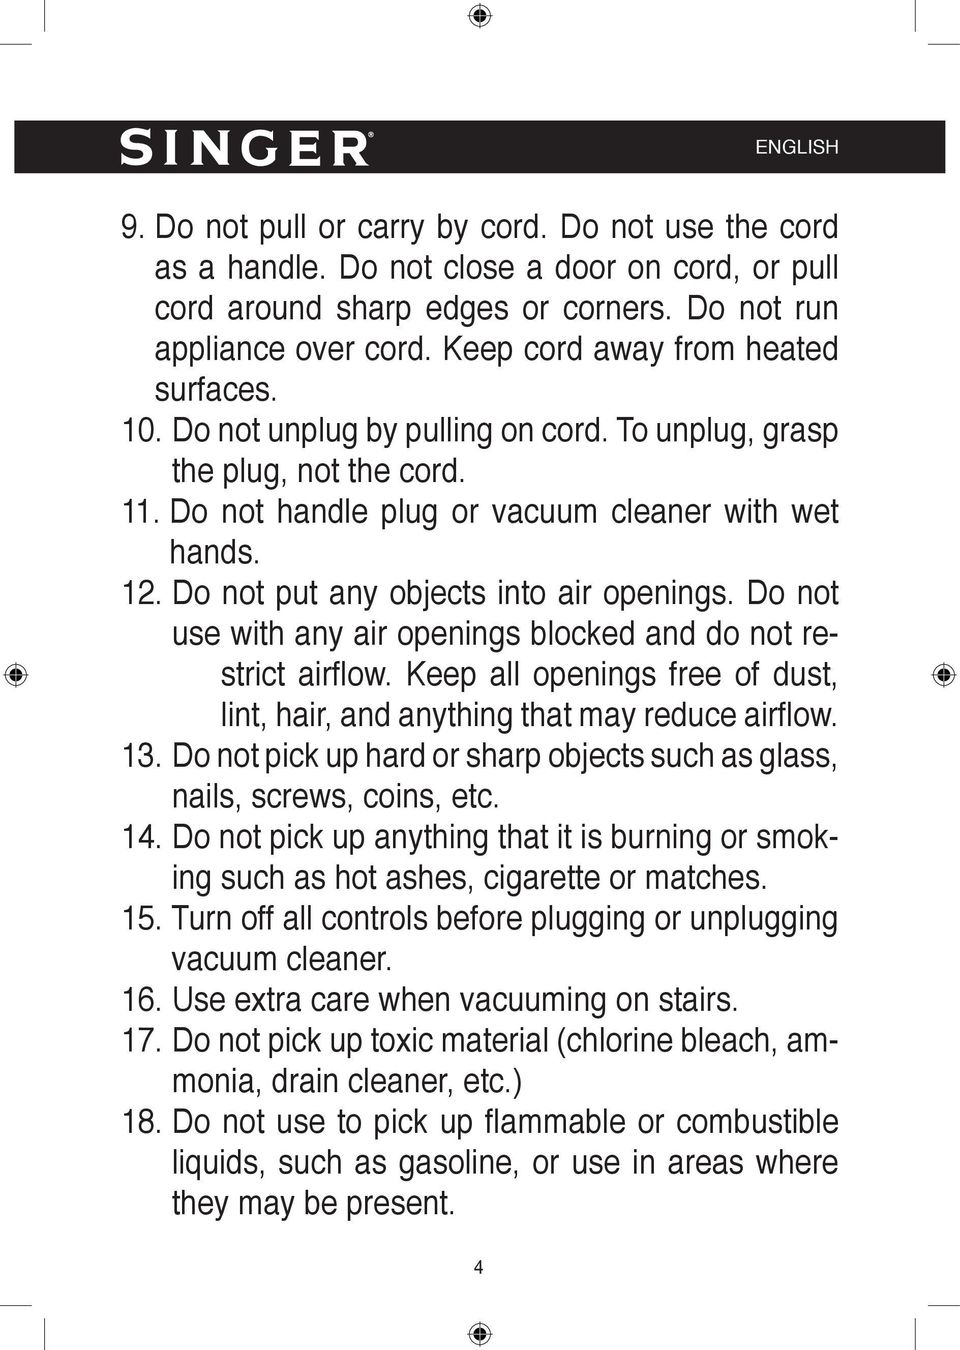 Do not put any objects into air openings. Do not use with any air openings blocked and do not restrict airfl ow. Keep all openings free of dust, lint, hair, and anything that may reduce airfl ow. 13.